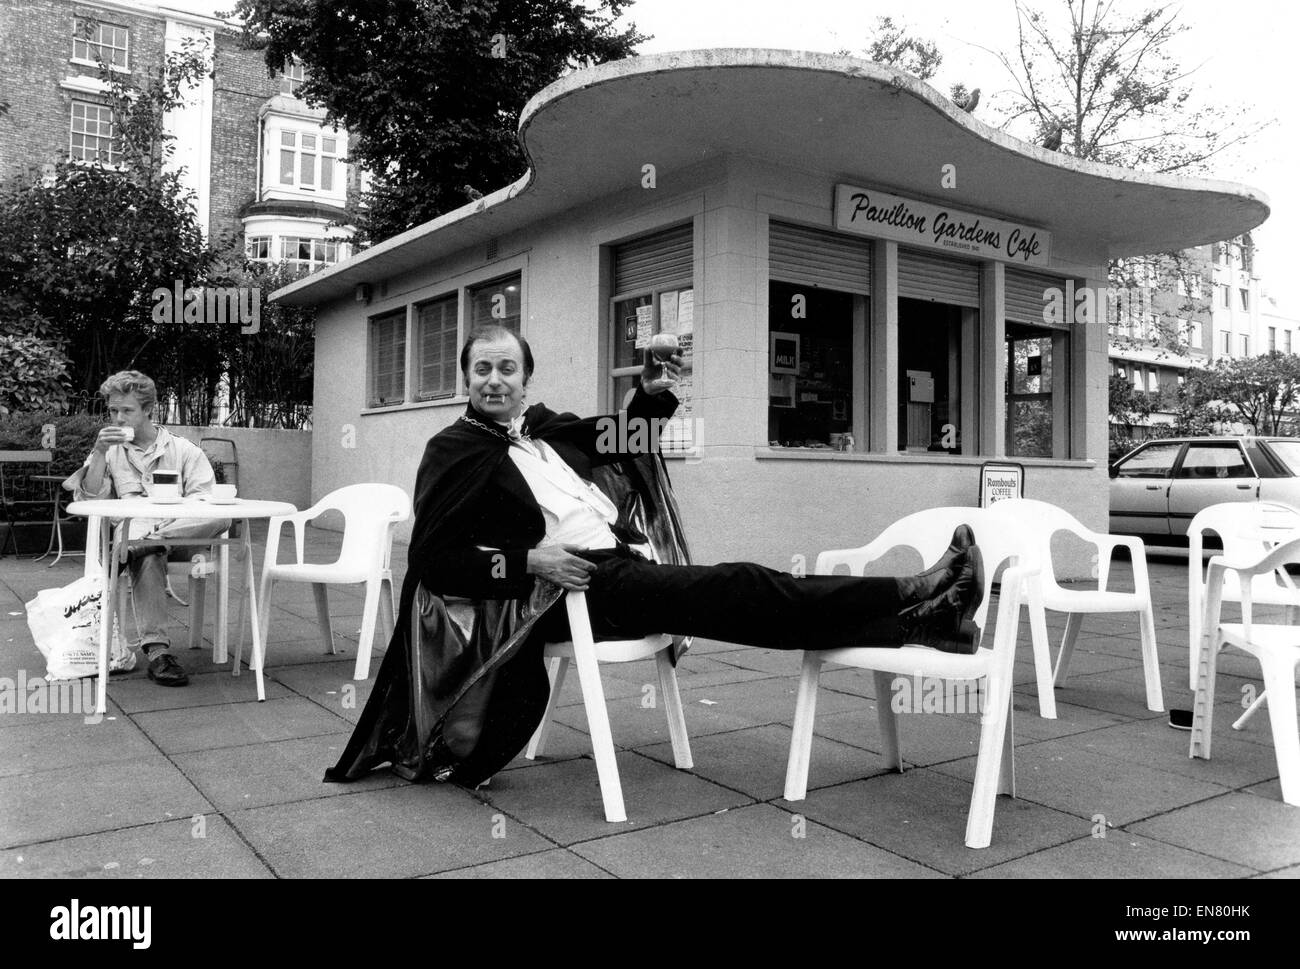 Dracula drinking at the famous Pavilion Gardens Cafe Brighton in 1988 Stock Photo